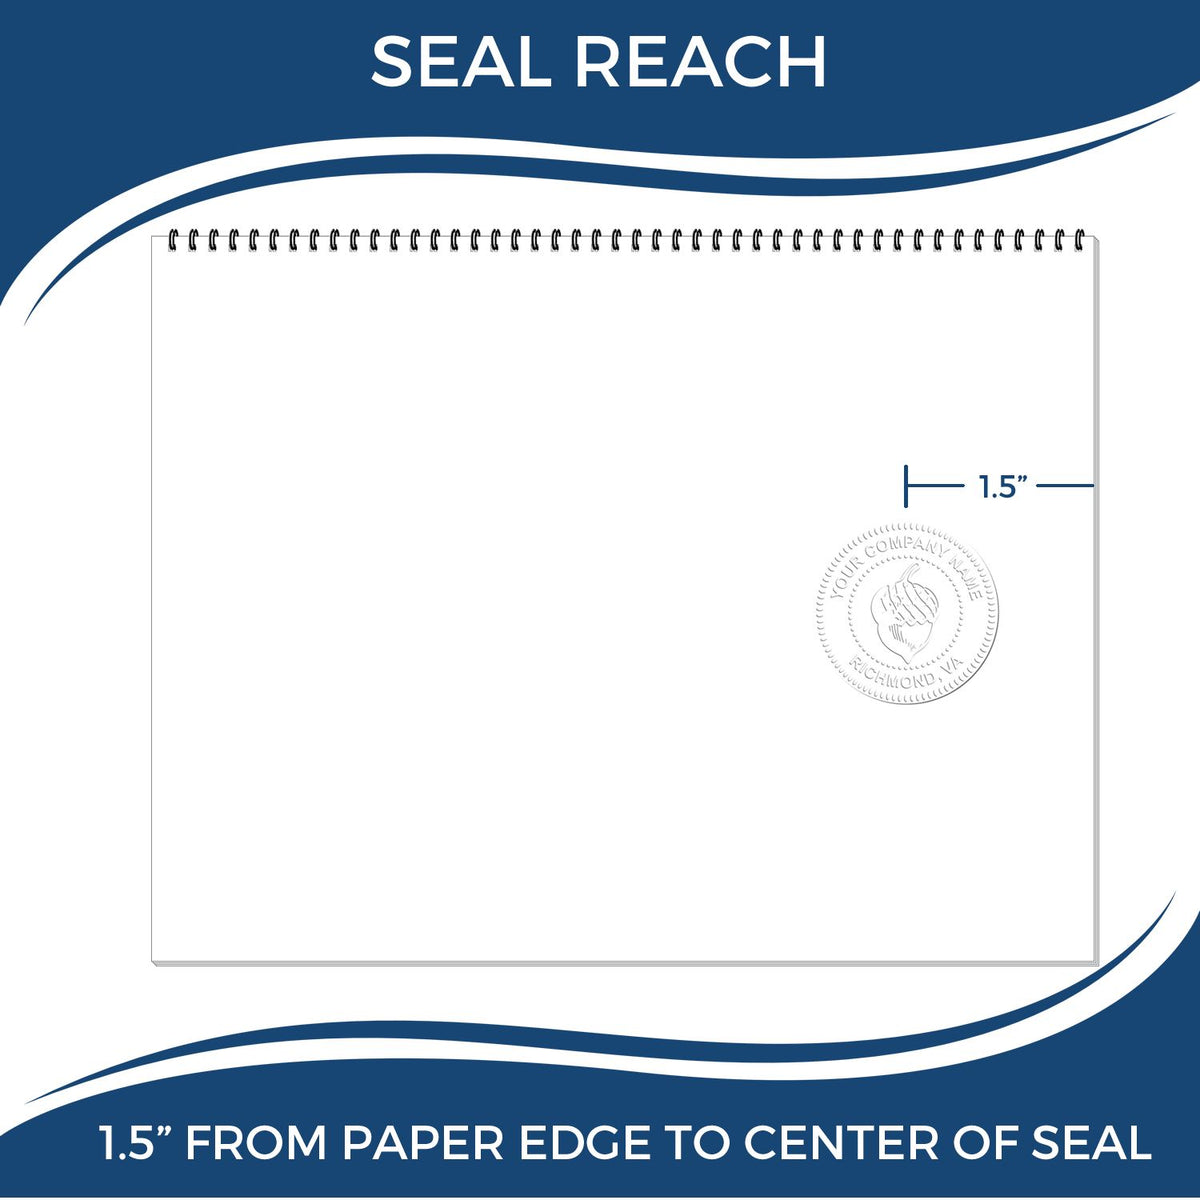 An infographic showing the seal reach which is represented by a ruler and a miniature seal image of the Guam Desk Surveyor Seal Embosser